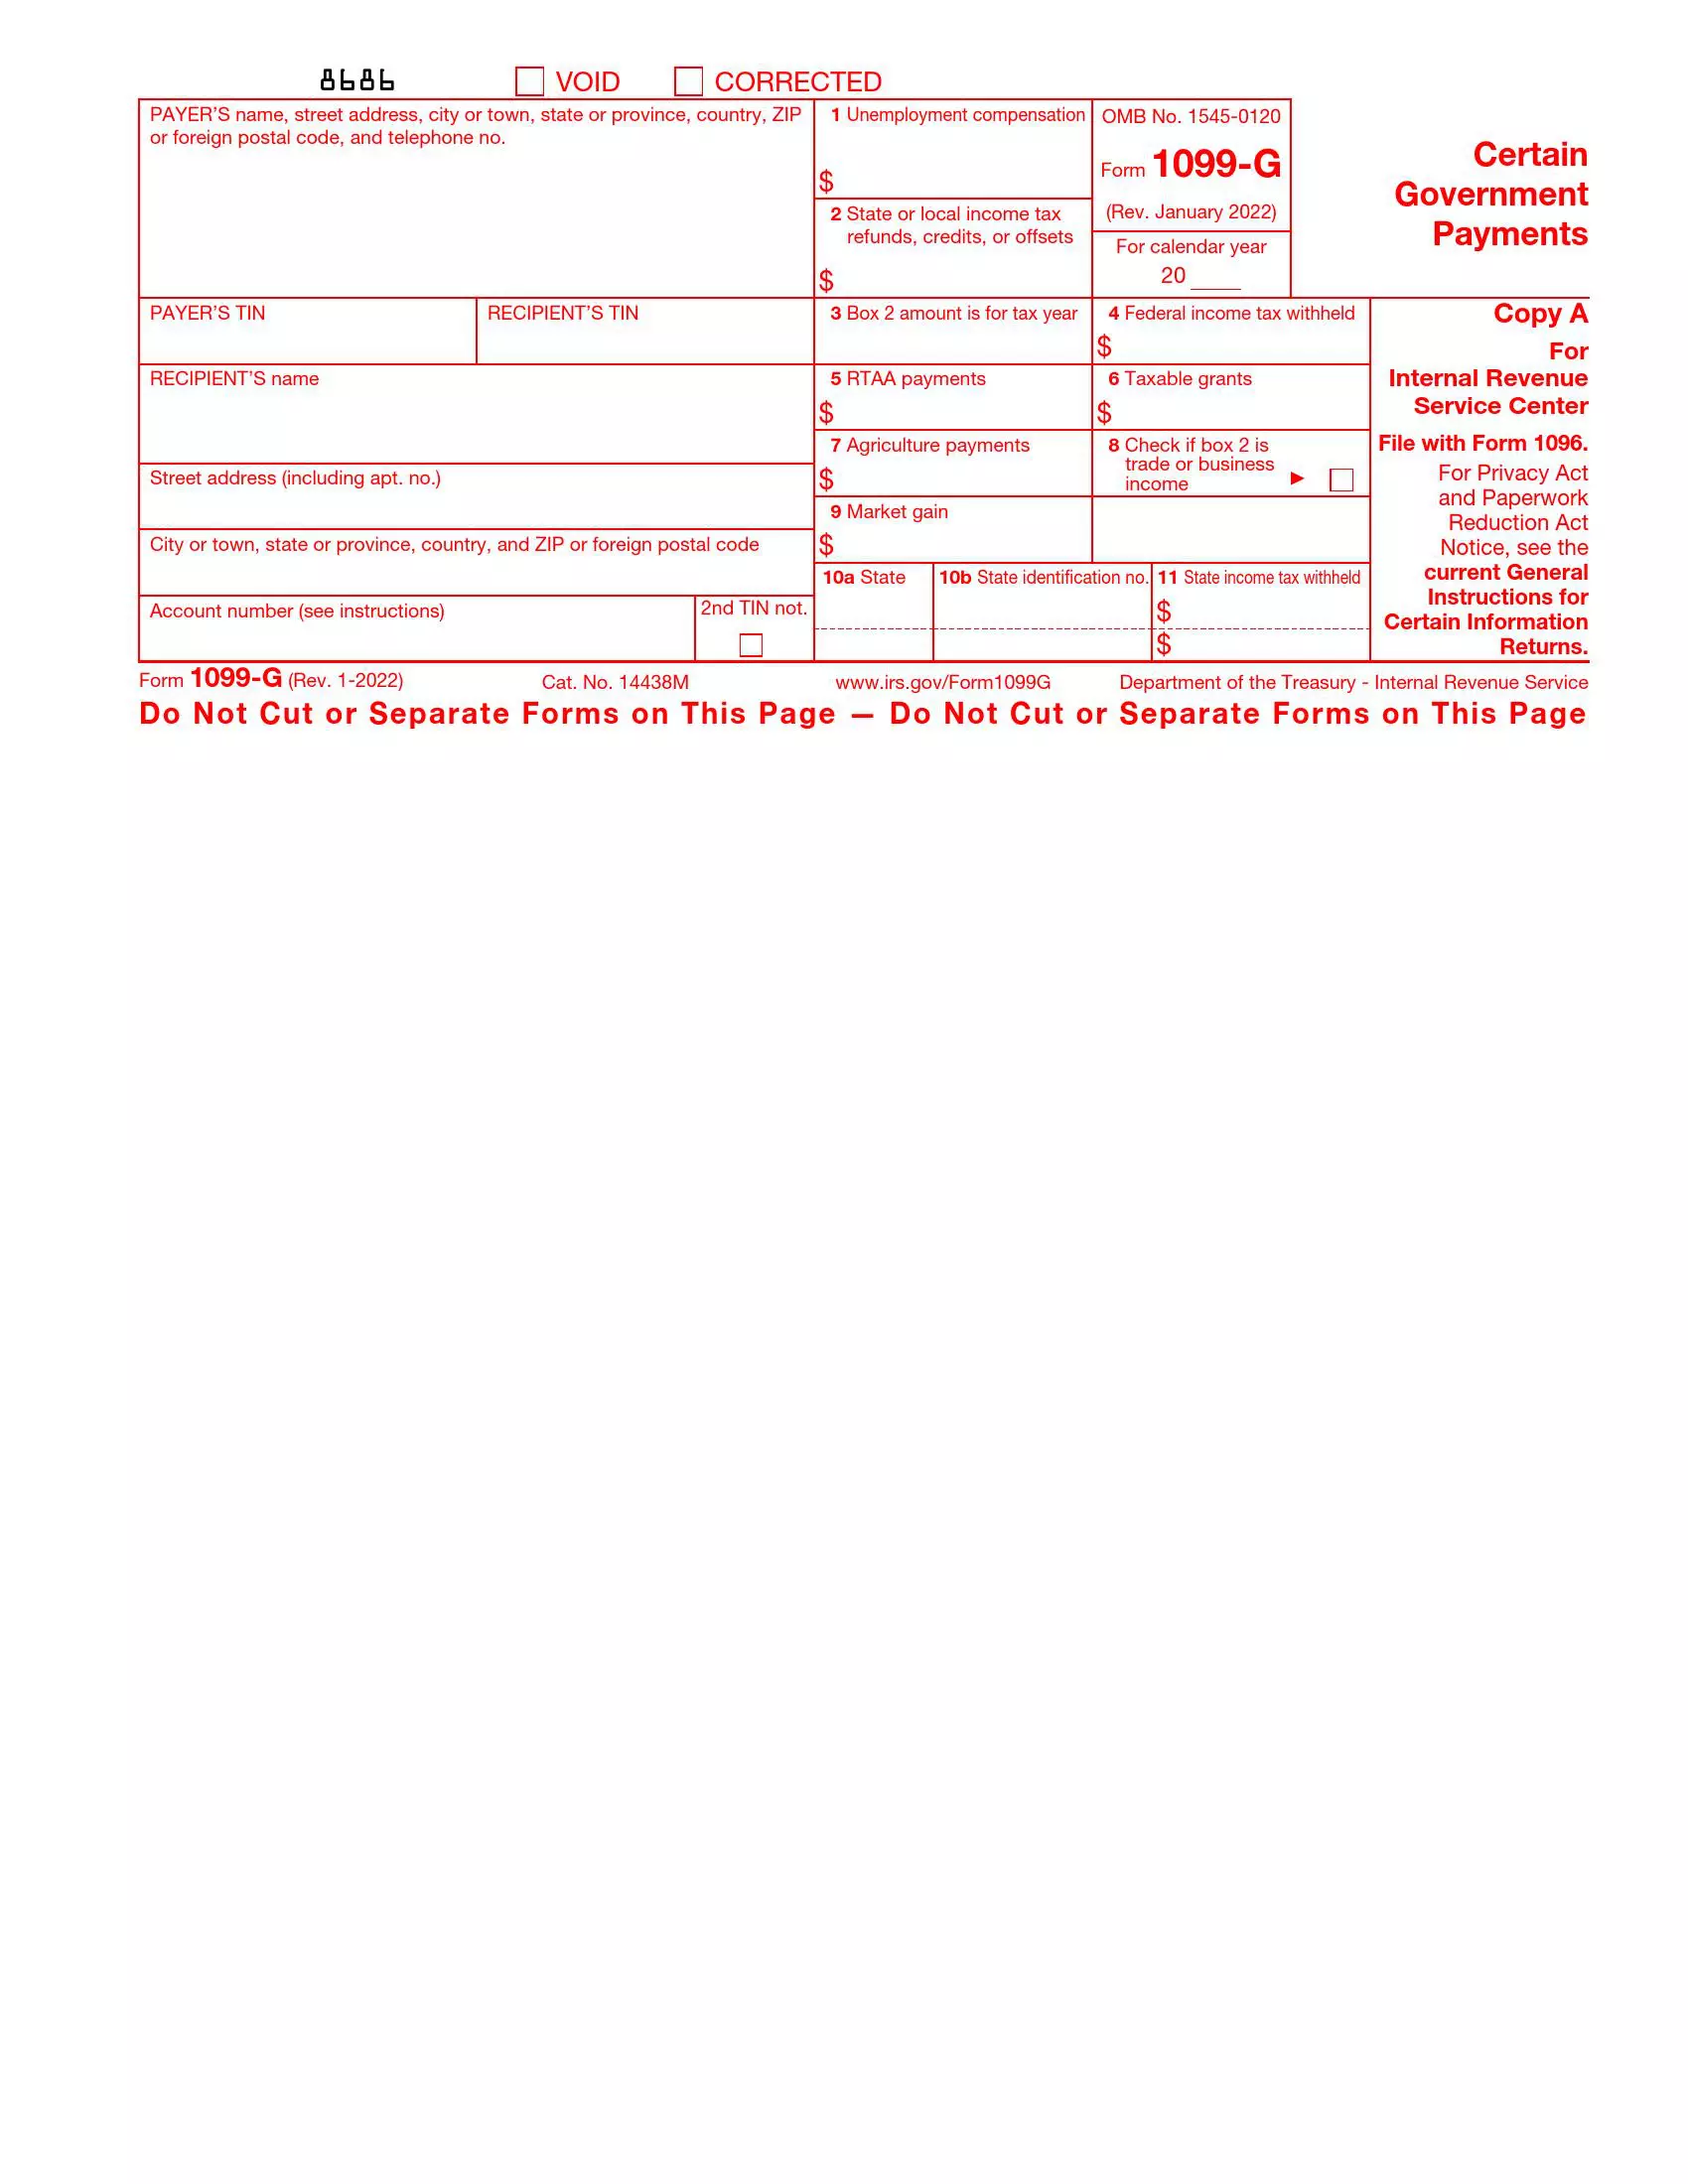 irs form 1099 g rev 01 2022 preview